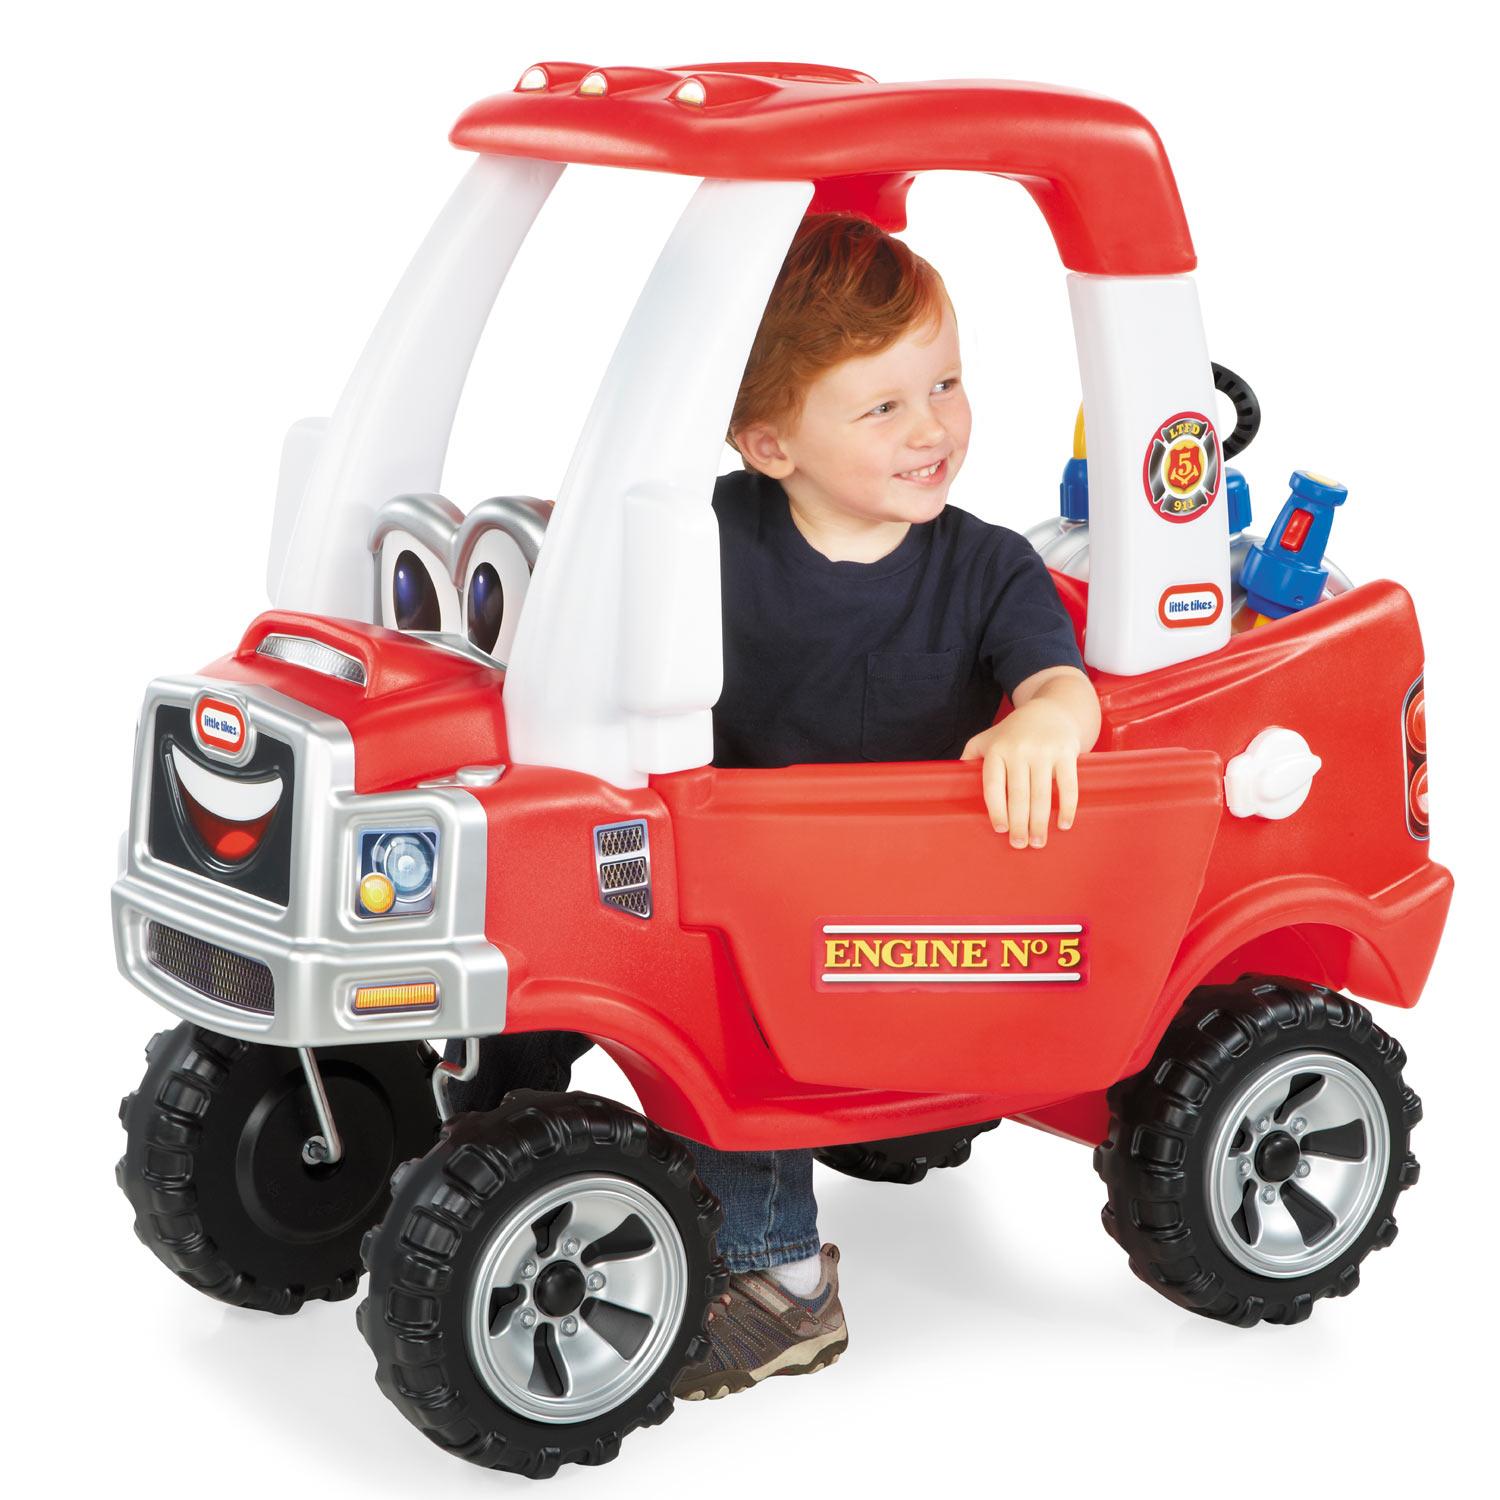 little tikes princess cozy coupe truck riding push toy